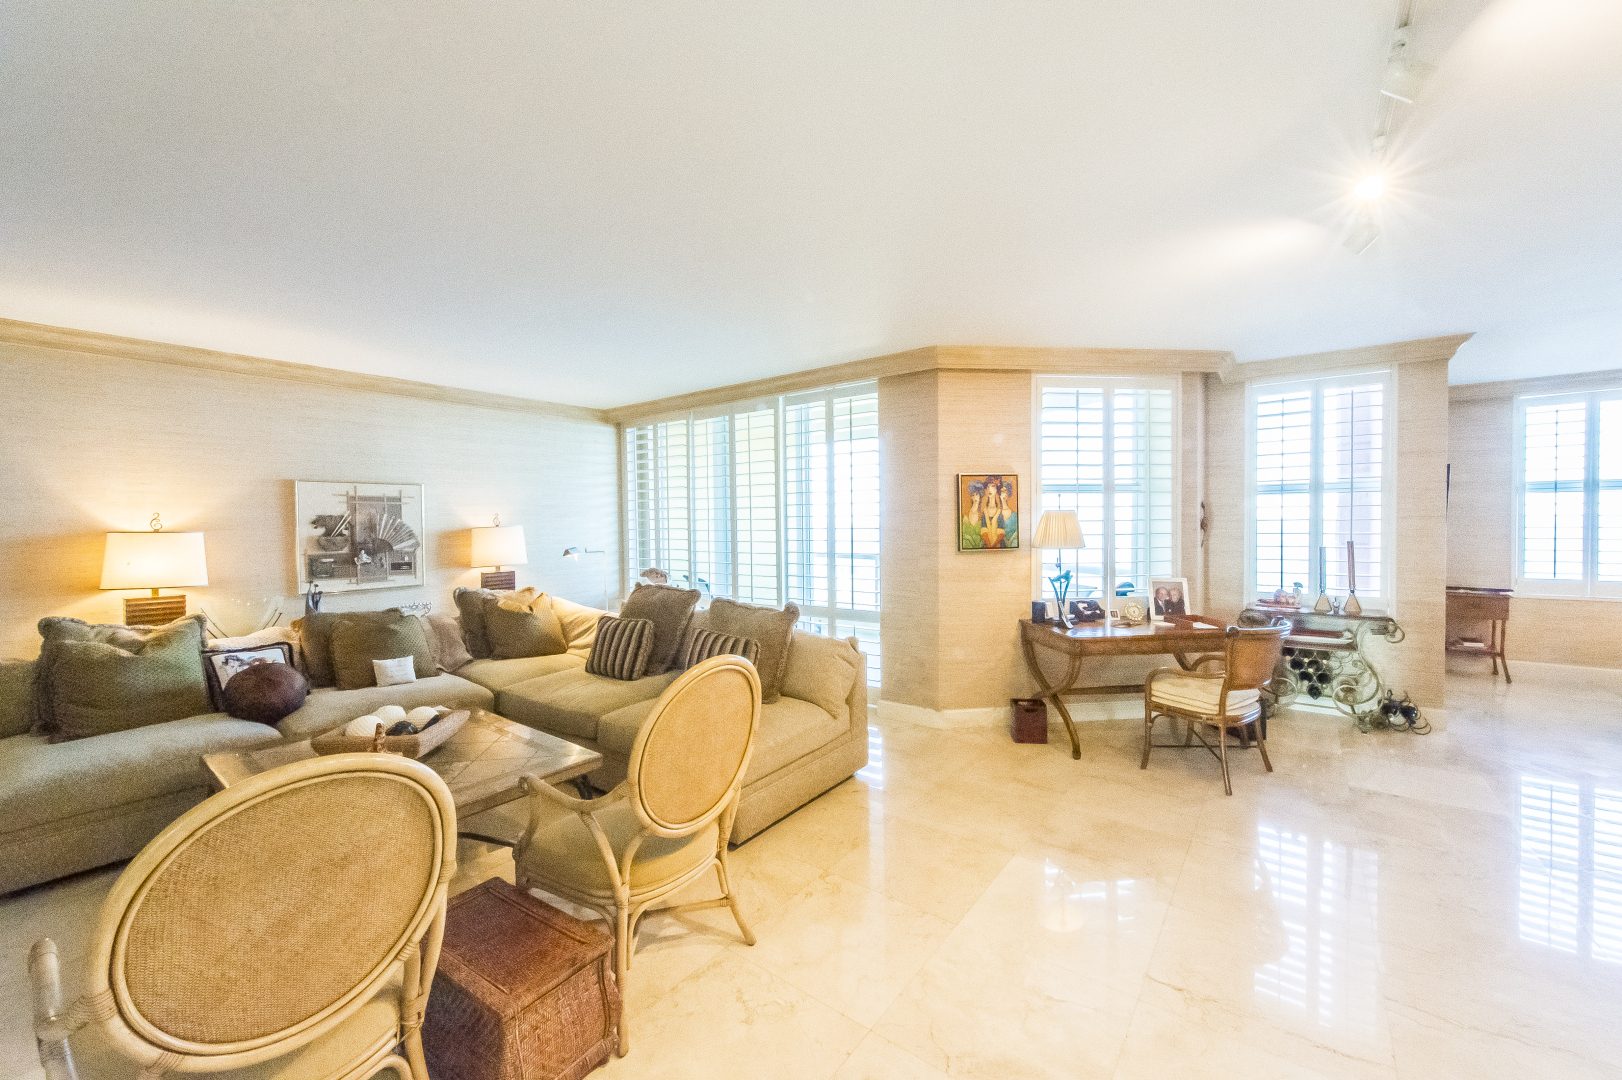 Residence 9D, Tower 1 at The Palms, Luxury Oceanfront Condominiums Fort Lauderdale, Florida 33305